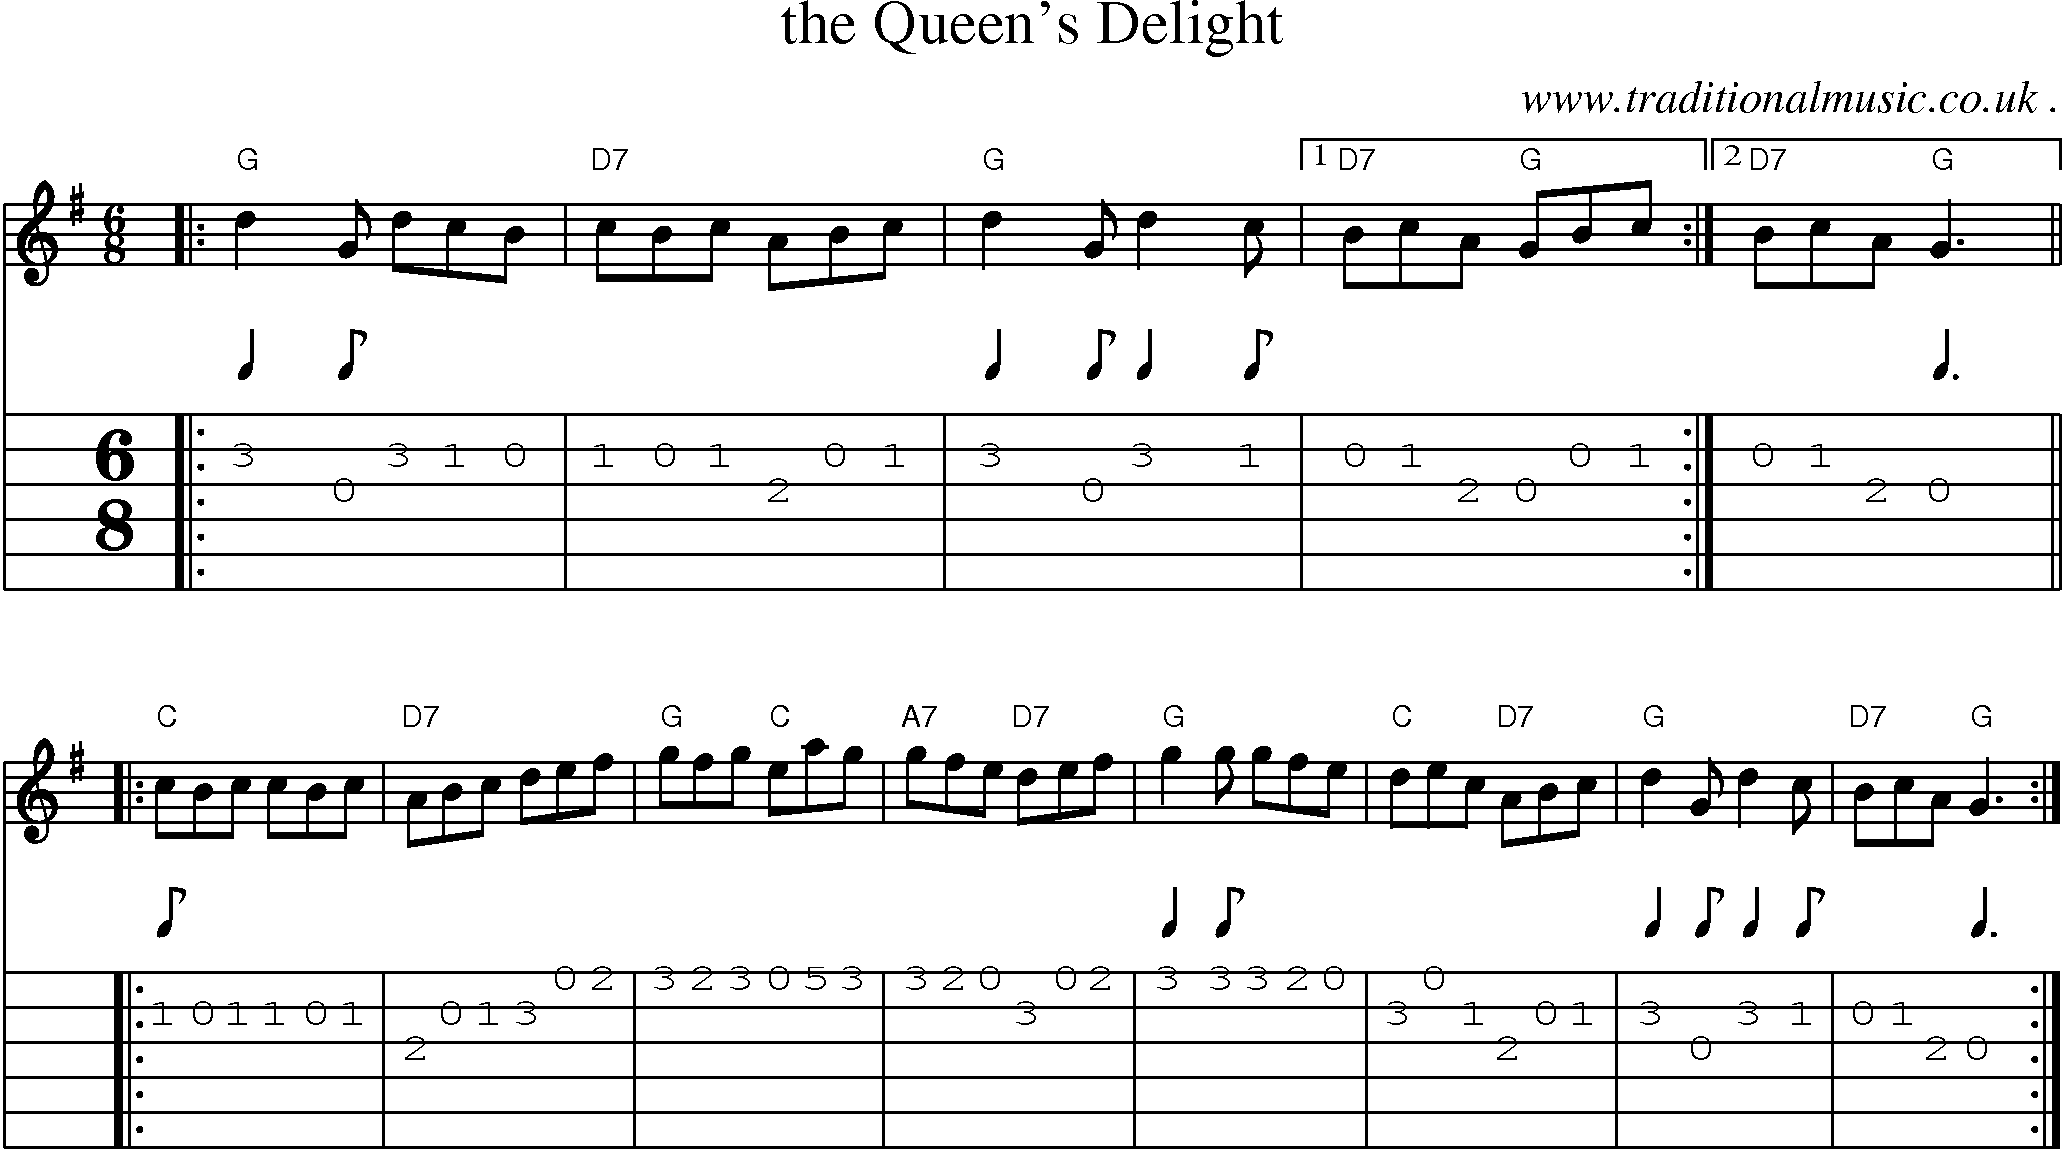 Sheet-music  score, Chords and Guitar Tabs for The Queens Delight